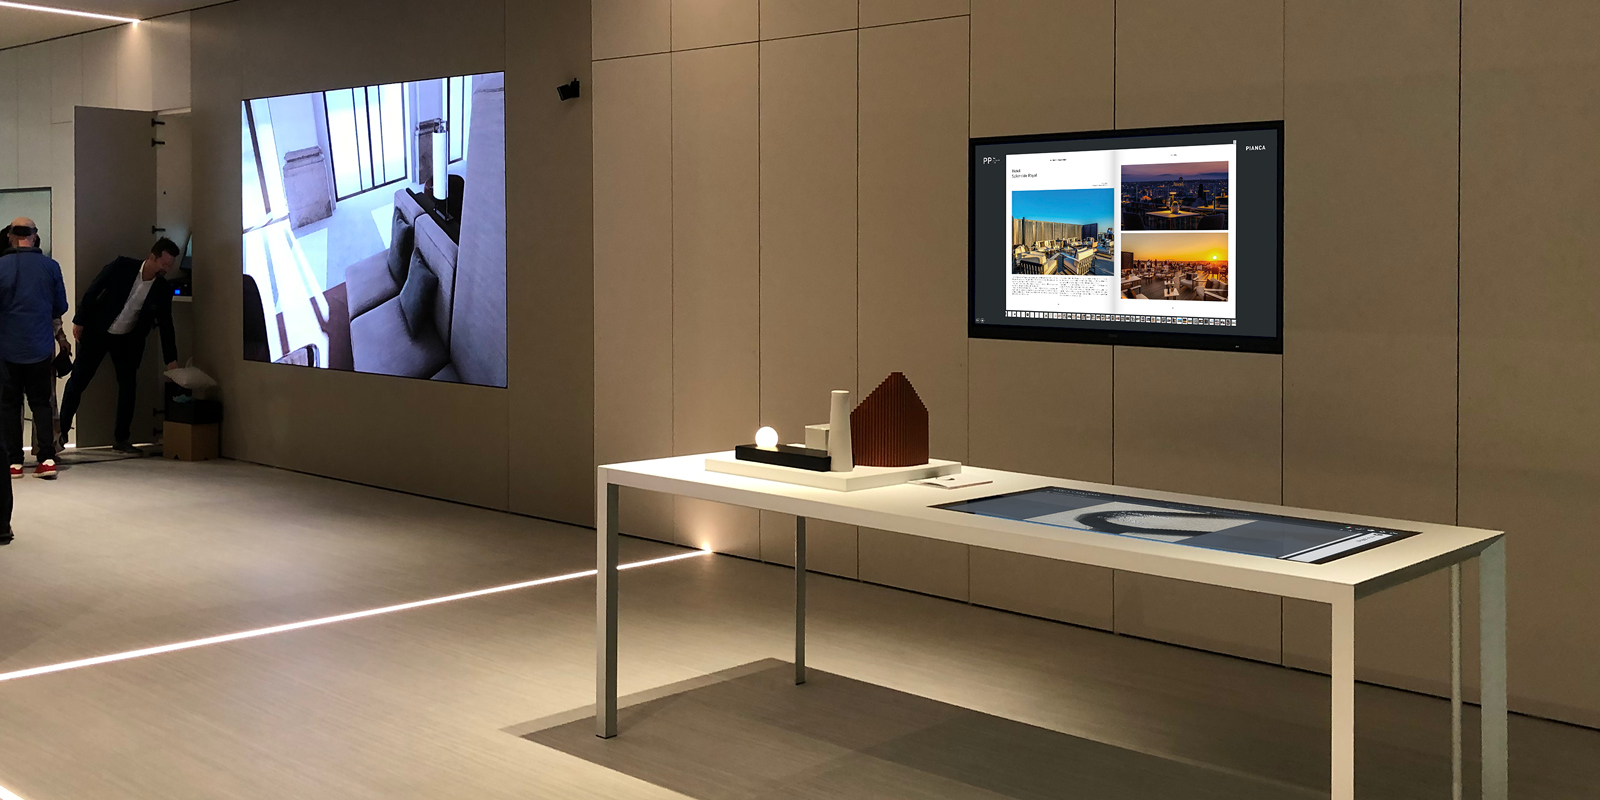 Touchwindow - A Multimedia Environment at Salone del Mobile in Milan